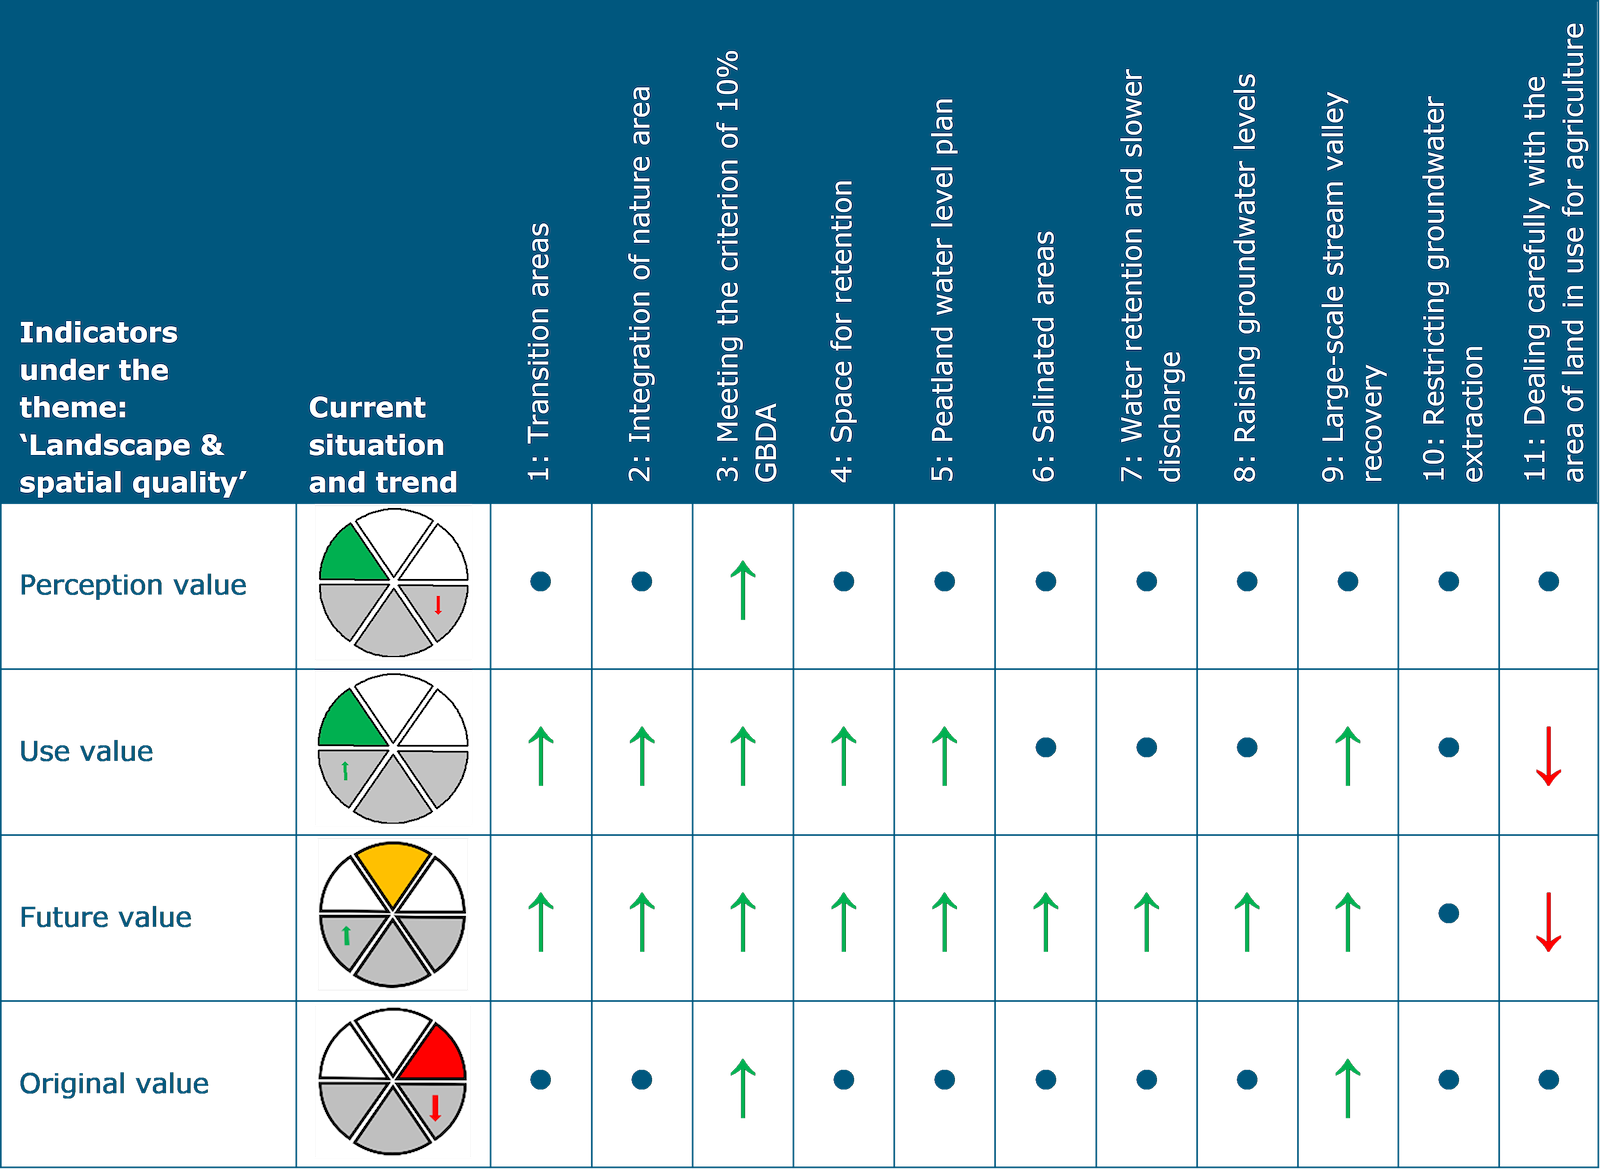 This table shows the assessment for the theme Landscape & spatial quality. The indicator ‘Perception value’ has a good current situation with a negative trend. All structuring choices, except structuring choice 3: Meeting the criterion of 10% green-blue networking, have no or practically no consequences. For structuring choice 3: Meeting the criterion of 10% green-blue networking, there is a probability of positive impact.  The indicator ‘Use value’ has a good current situation with a positive trend. There is a probability of positive impact for the structuring choices 1: Transition areas, 2: Integration of nature area, 3: Meeting the criterion of 10% green-blue networking, 4: Space for retention, 5: Peatland water level plan and 9: Large-scale stream valley recovery. There are no or practically no consequences for structuring choices 6: Salinated areas, 7: Water retention and slower discharge, 8 Raising groundwater levels and 10: Restricting groundwater extraction. For structuring choice 11: Dealing carefully with the area of land in use for agriculture, there is a probability of negative impact. The indicator ‘Future value’ has a current situation of moderate status with a positive trend. For all structuring choices, except choices 10: Restricting groundwater extraction and 11: Dealing carefully with the area of land in use for agriculture, there is a probability of positive impact. For structuring choice 10: Restricting groundwater extraction, there are no or practically no consequences. For structuring choice 11: Dealing carefully with the area of land in use for agriculture there is a probability of negative impact. The indicator ‘Original value’ has a poor current situation with a negative trend. There is a probability of positive impact for the structuring choice 3: Meeting the criterion of 10% green-blue networking and structuring choice 9: Restricting groundwater extraction. For all other structuring choices there are no or practically no consequences.